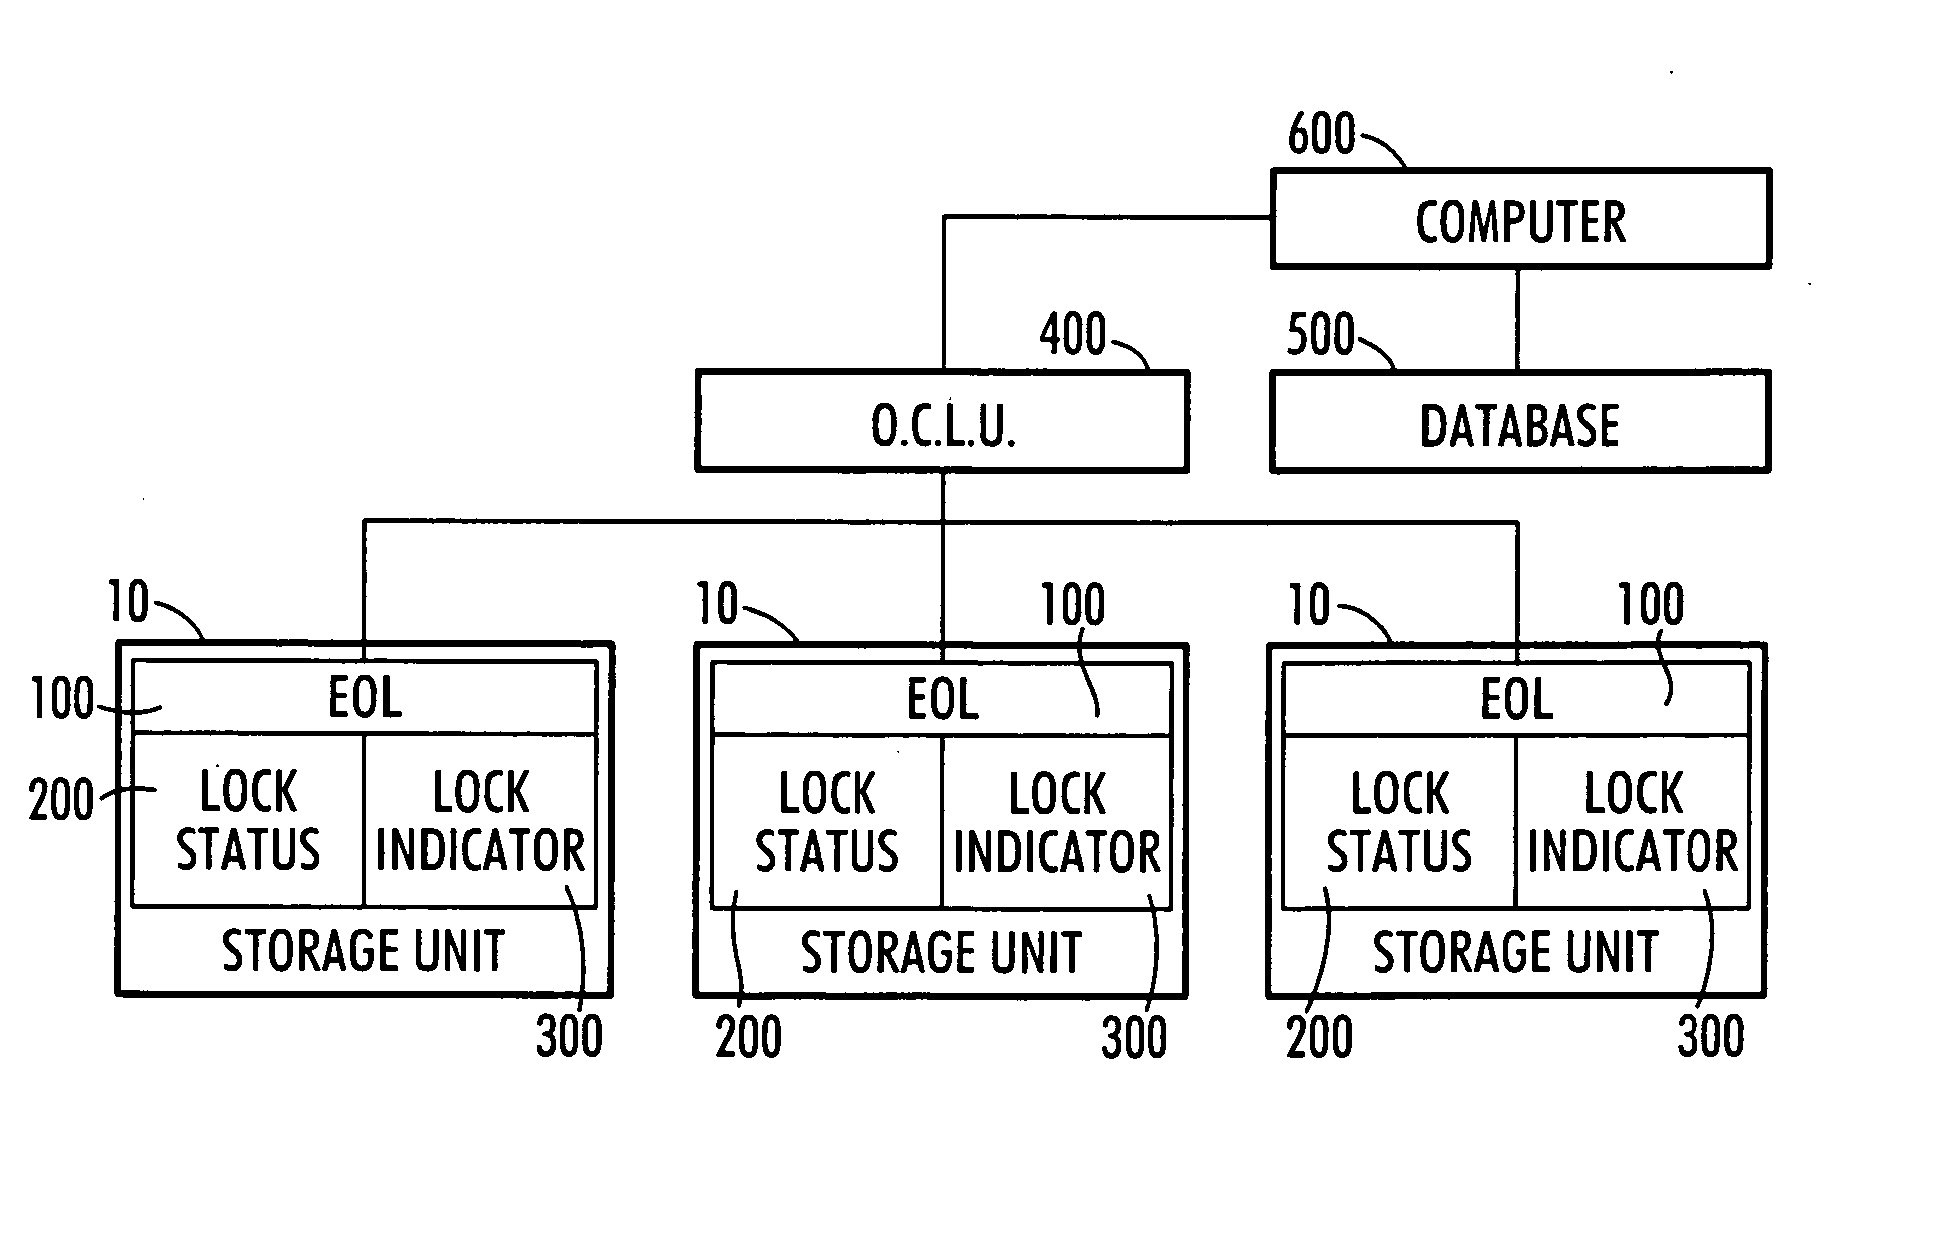 Over-lock for self-storage units